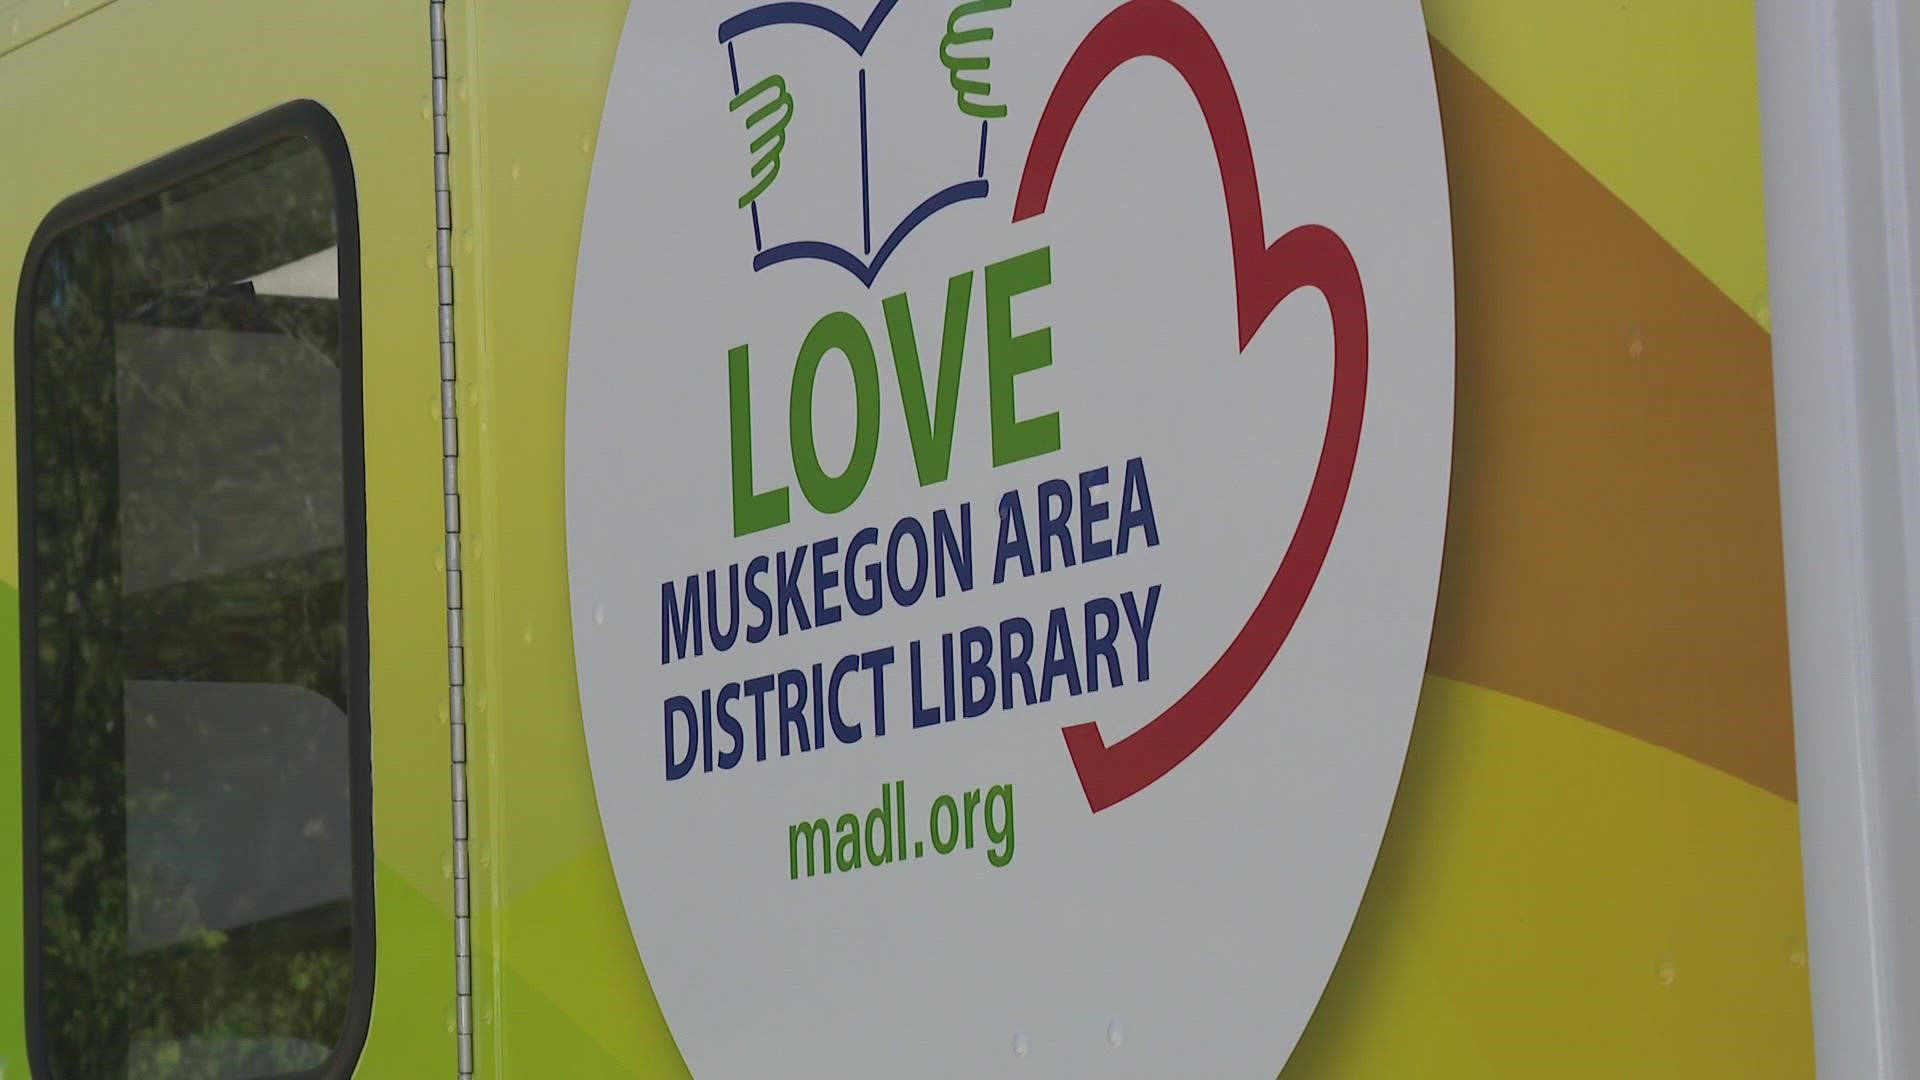 The new Muskegon Area District Library Bookmobile will operate all year-long, four days a week. Dates, hours, and locations to be determined.